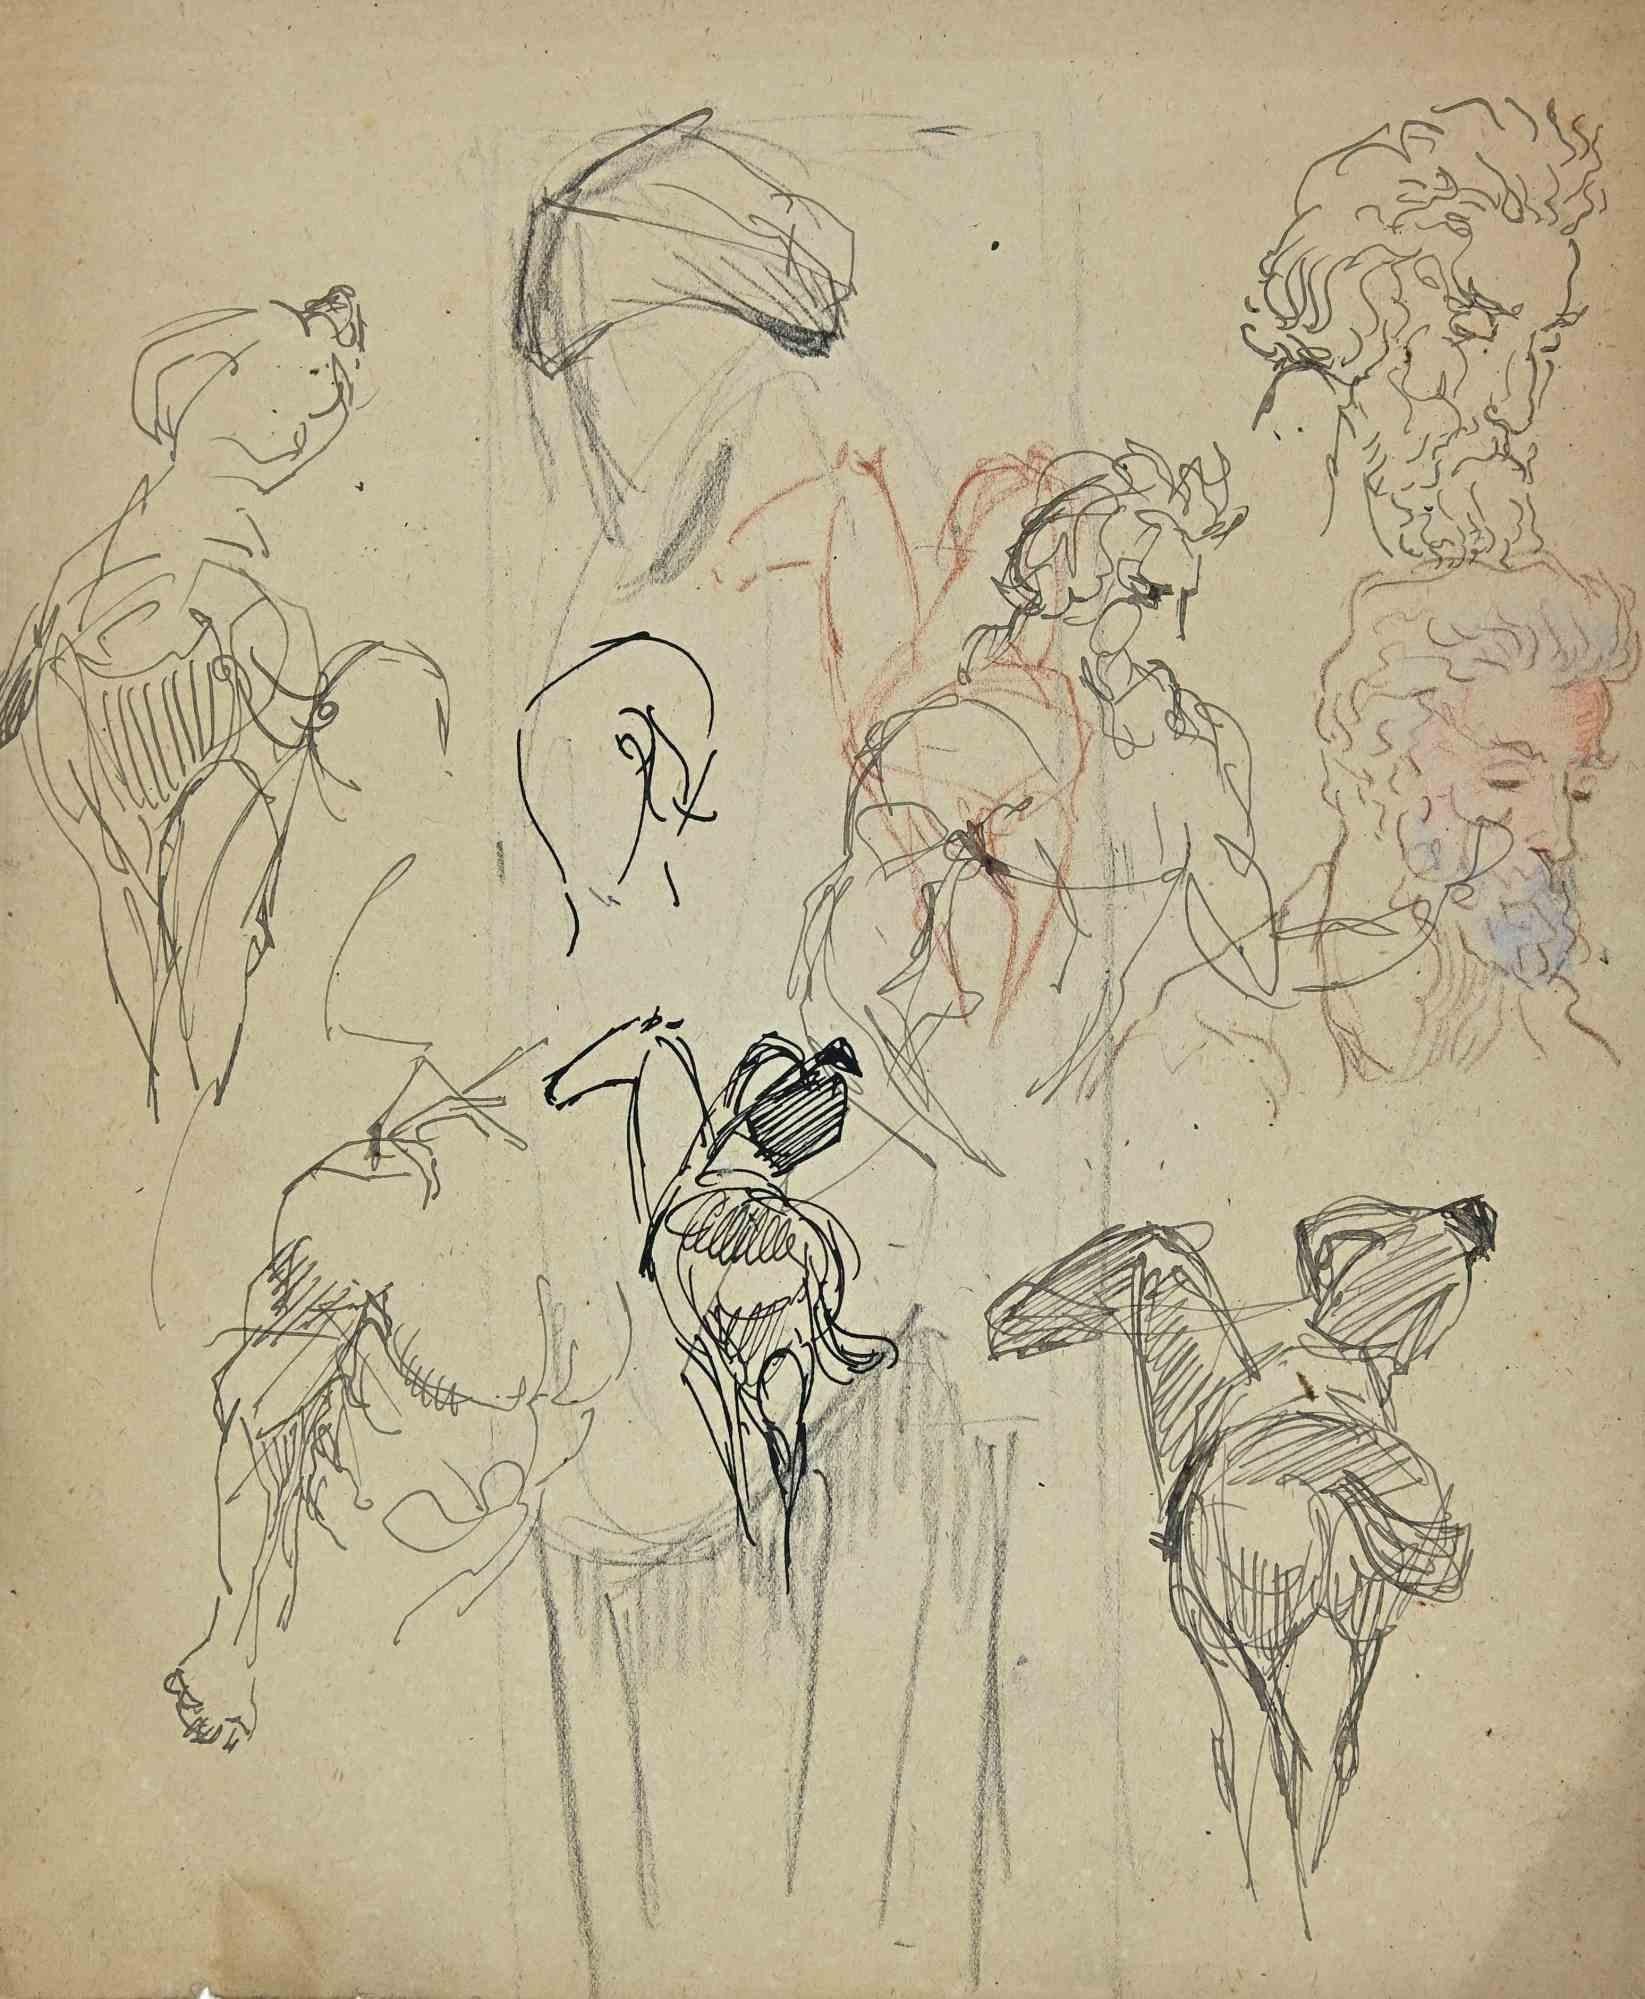 The Sketches of Figures - Original Drawing by Norbert Meyre - Mid-20th Century